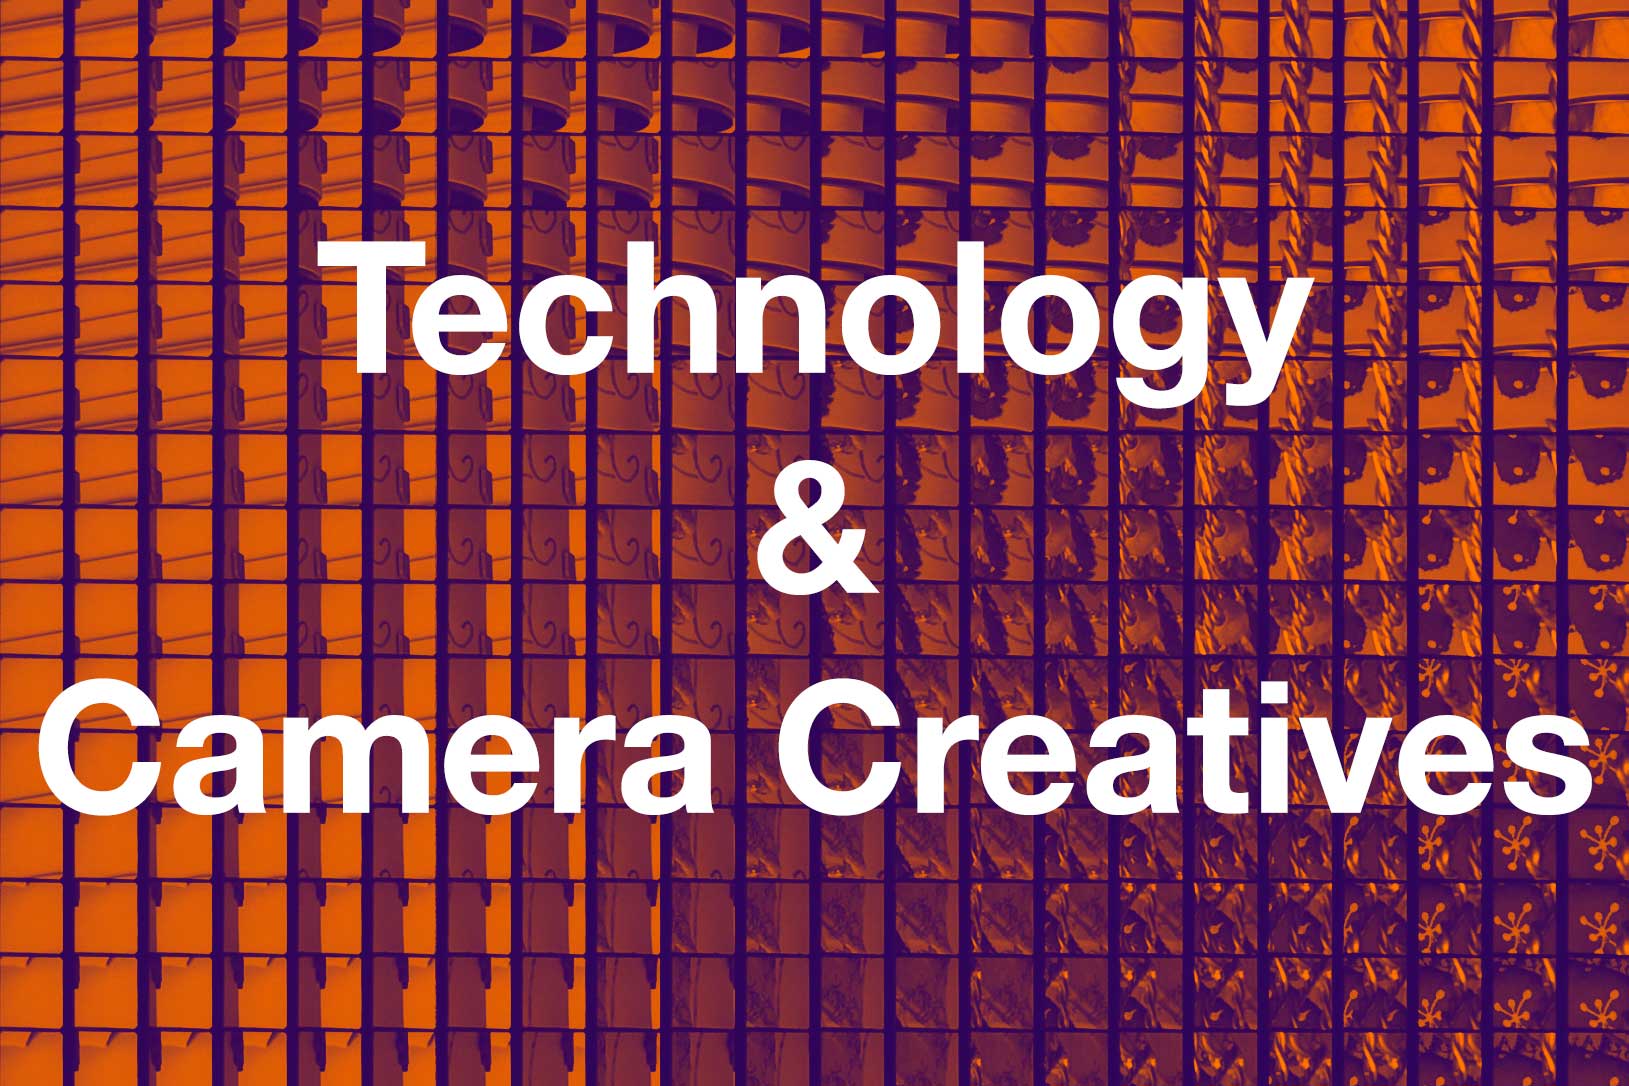 Introducing the Technology & Camera Creatives Meetup Group